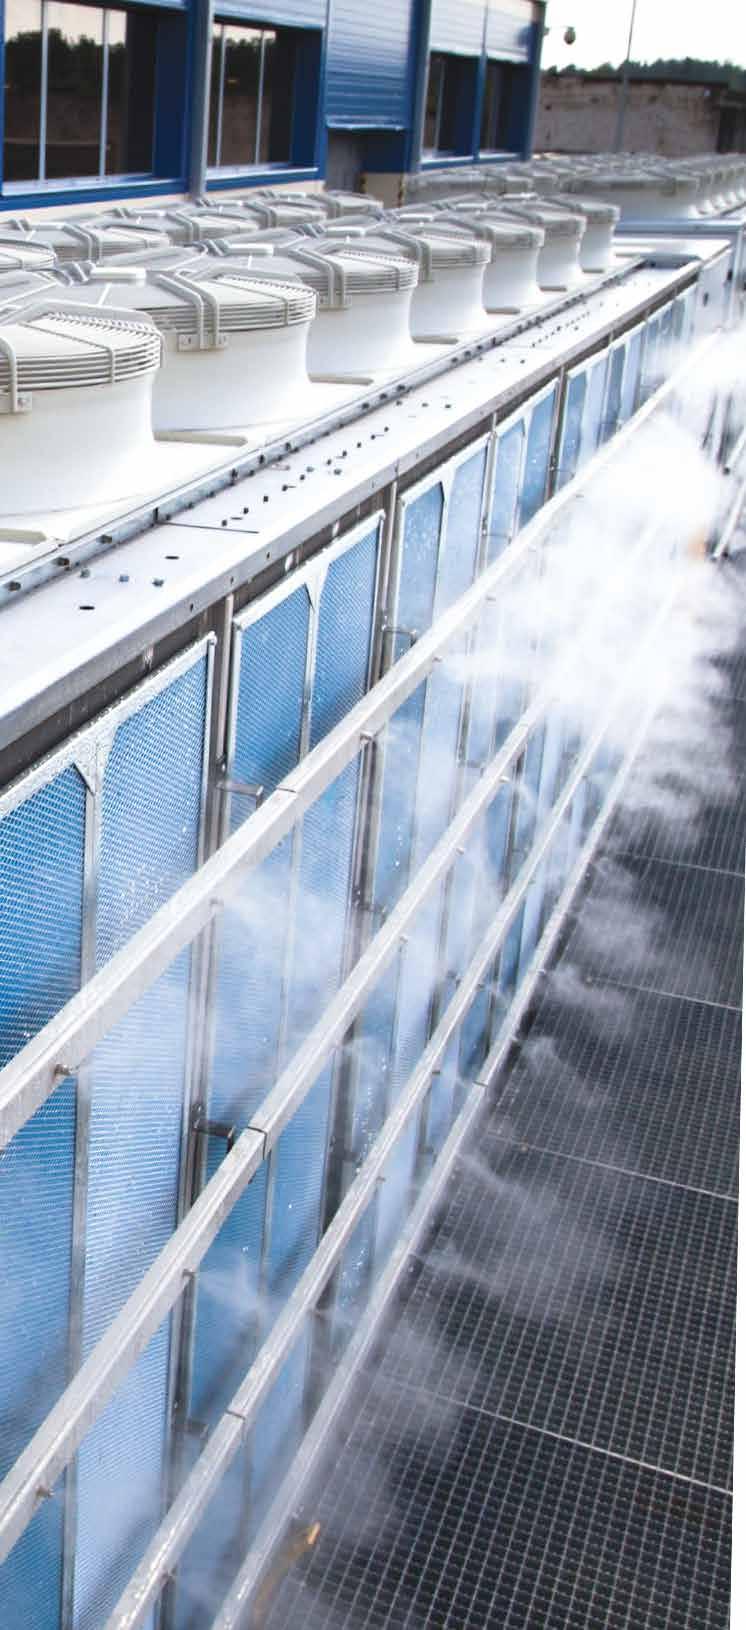 Smart Cooling is mounted externally in front of condensers of a cooling equipment, without any impacts or changes in the interior of the cooling equipment and no effect on the manufacturers